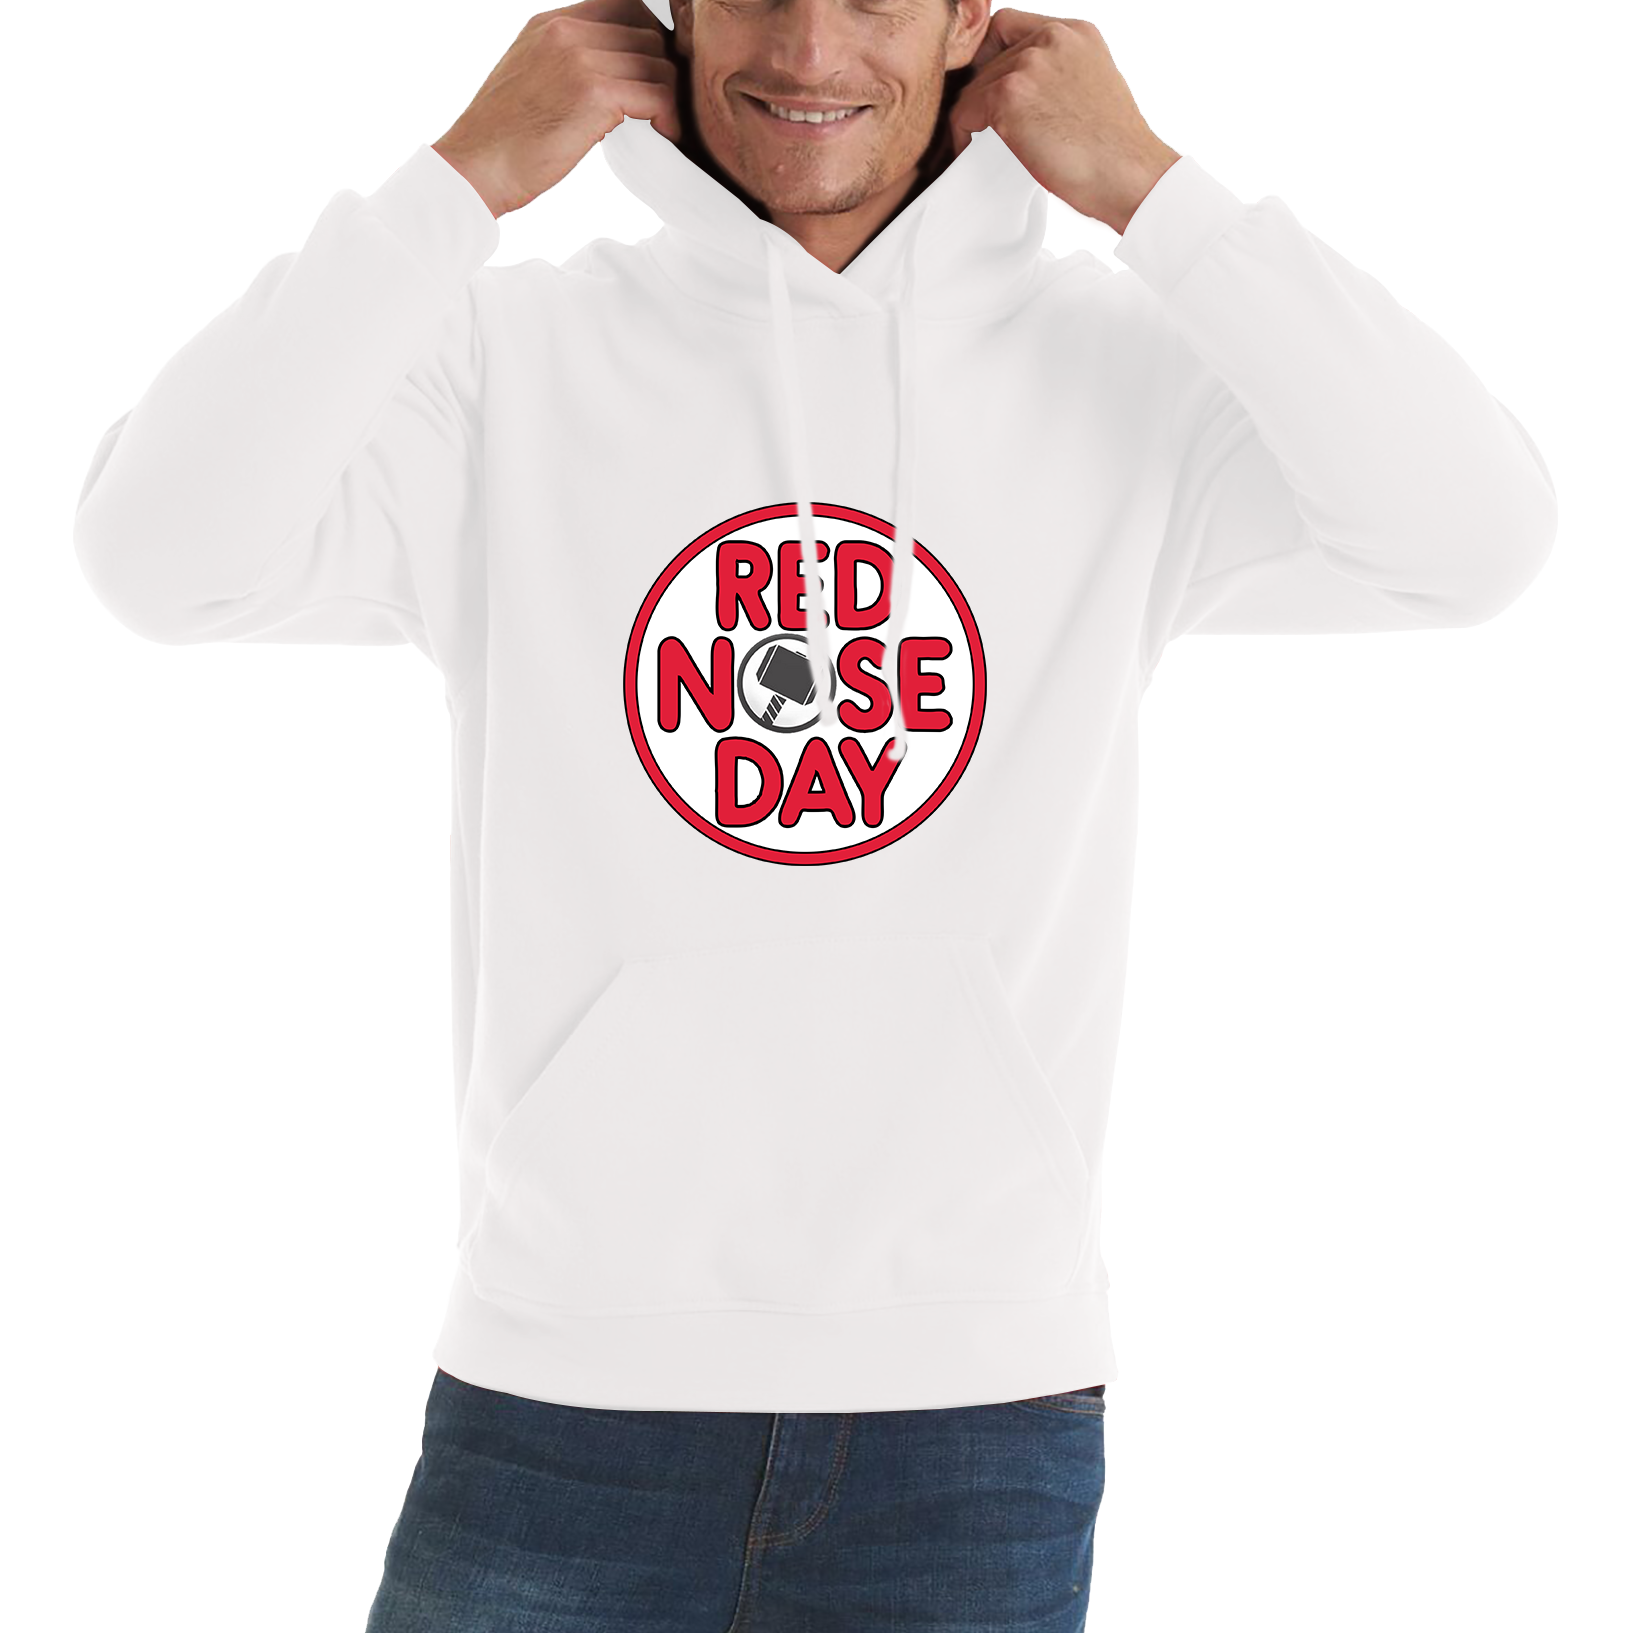 Marvel Avenger Thor Hammer Red Nose Day Adult Hoodie. 50% Goes To Charity